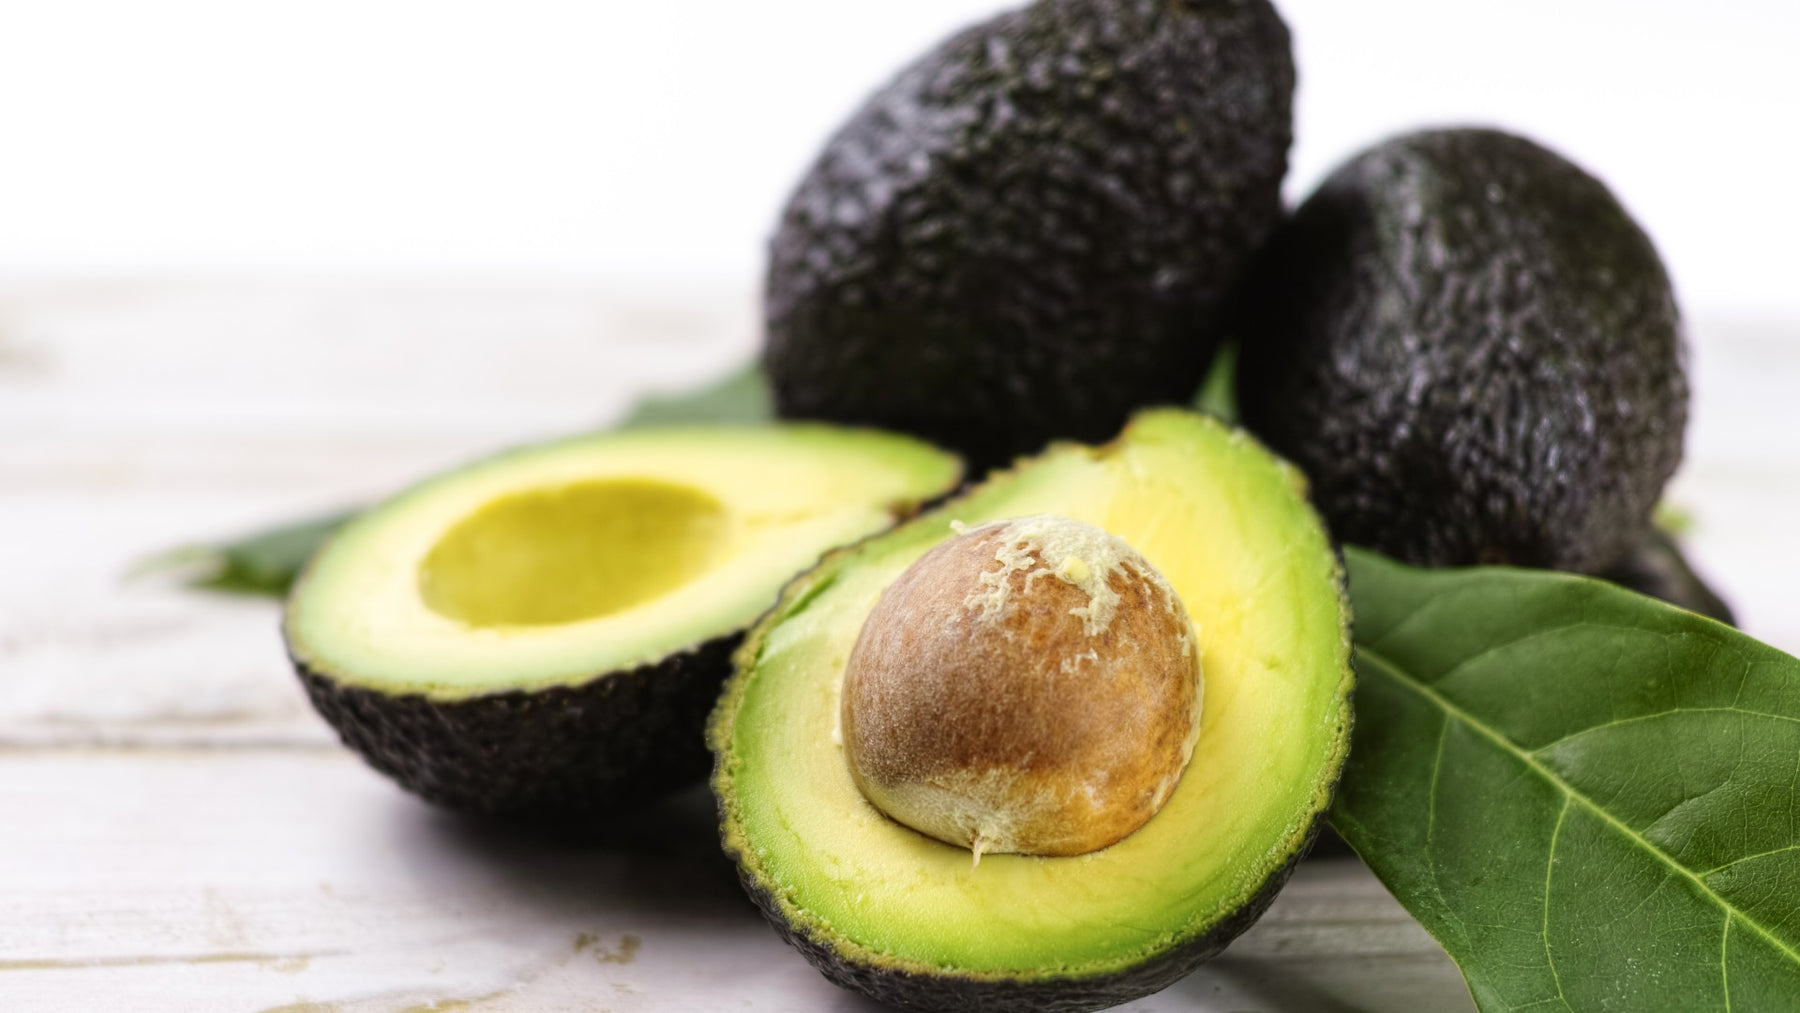 How Many Calories in an Avocado?